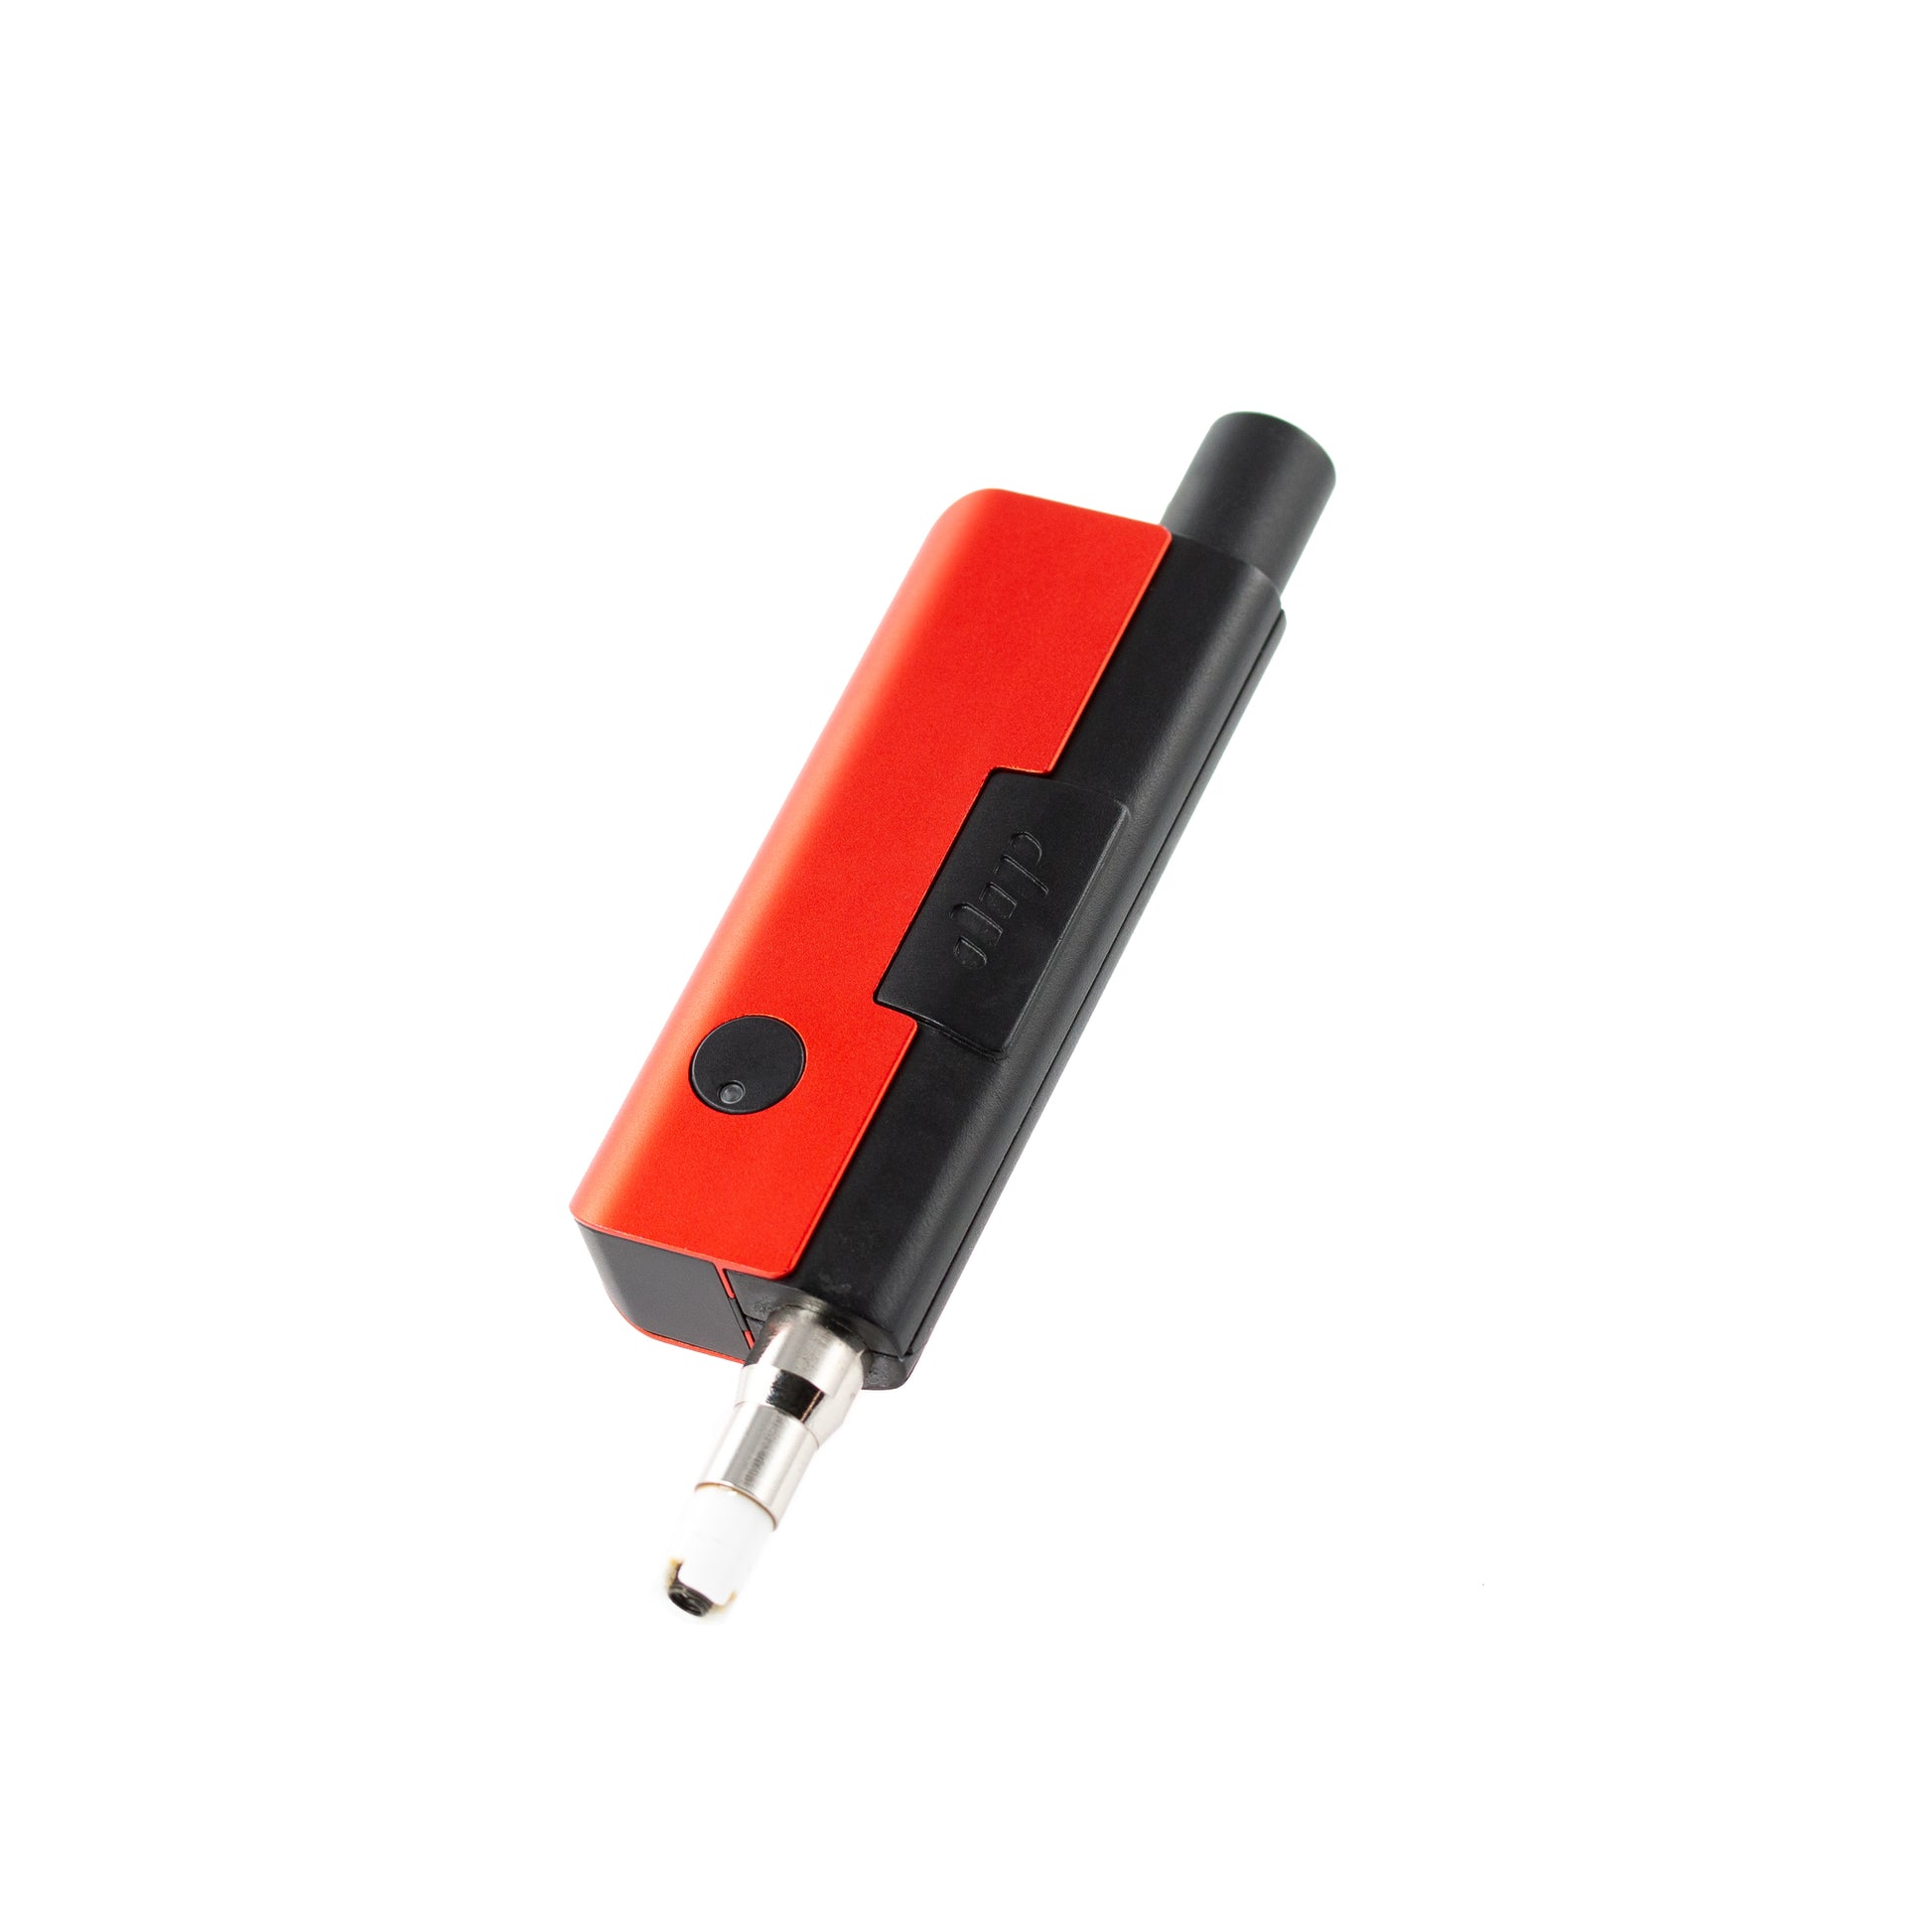 EVRI dab pen and honey straw, red 